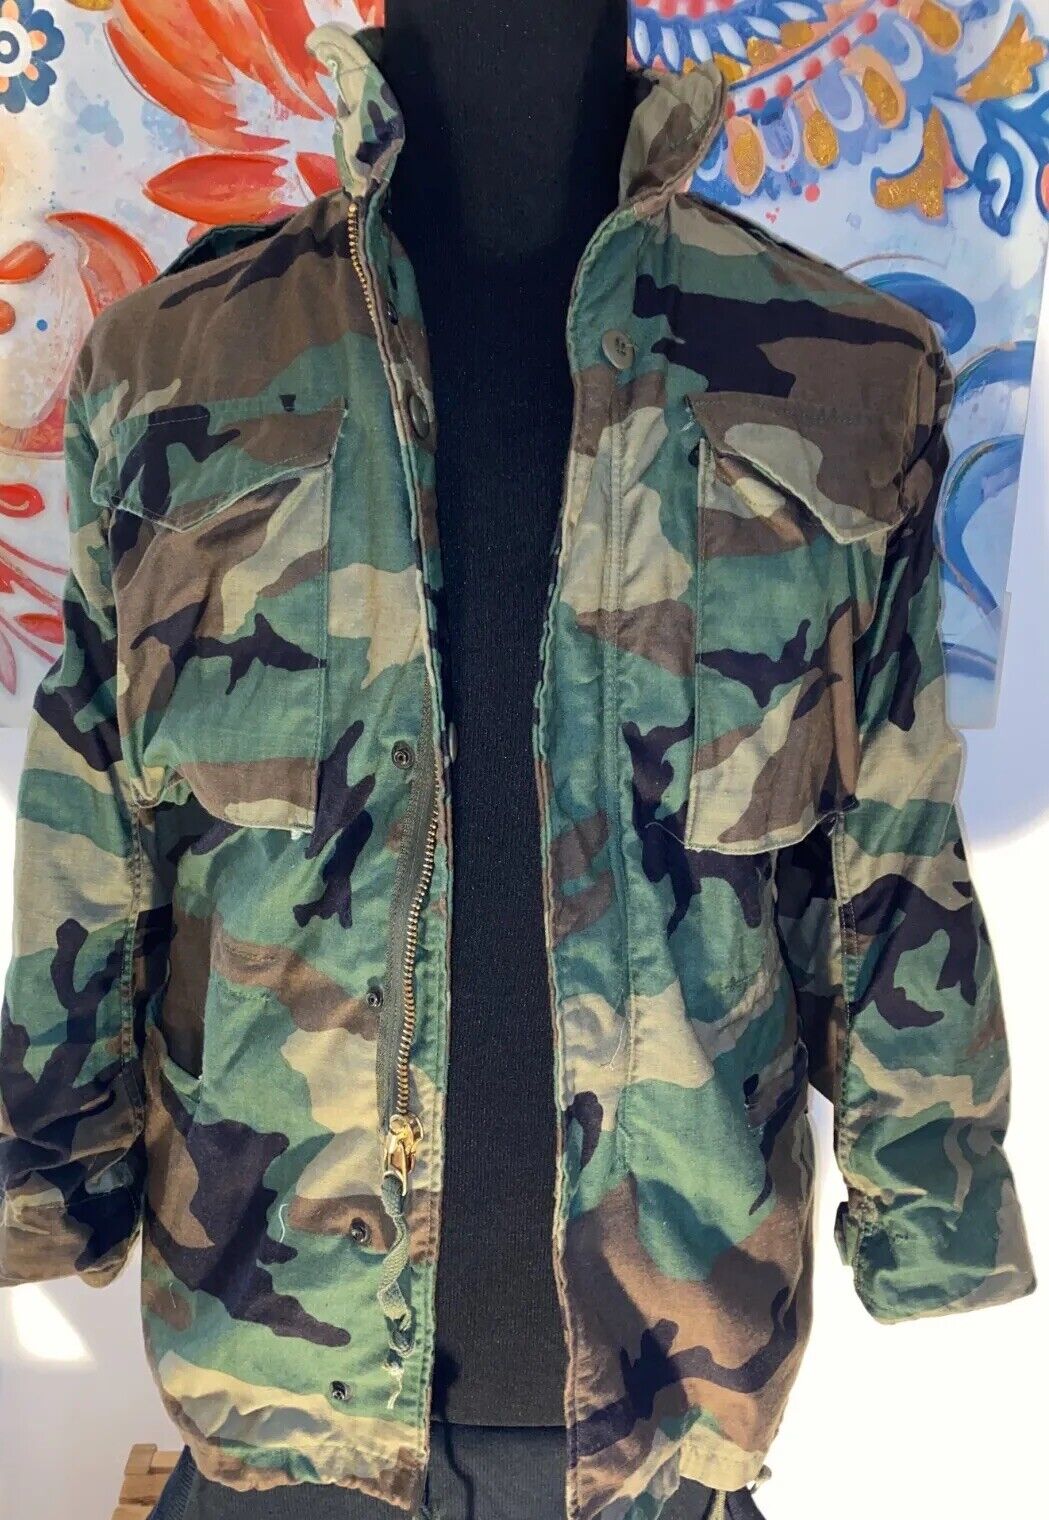 Authentic Camouflage Jacket, Small-Regular